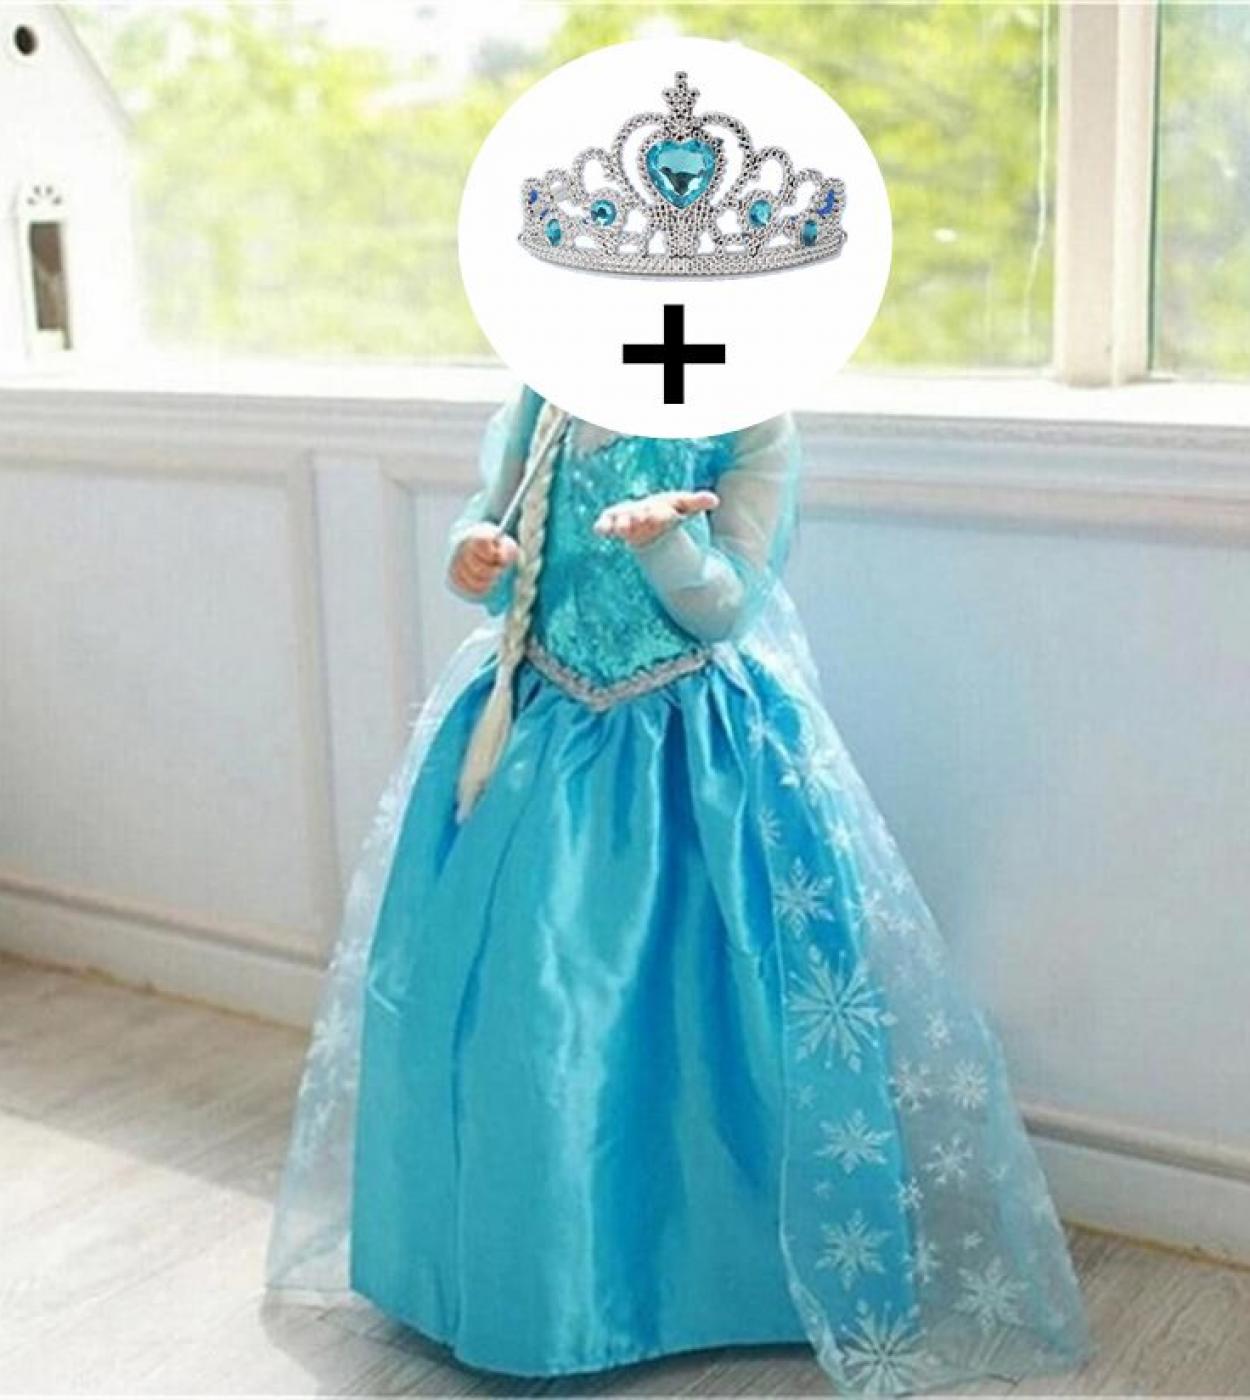 4 10y Baby Girl Princess Dress For Girls Clothes Set Cosplay Costumeheadband Fancy Halloween Christmas Party Dressesclo